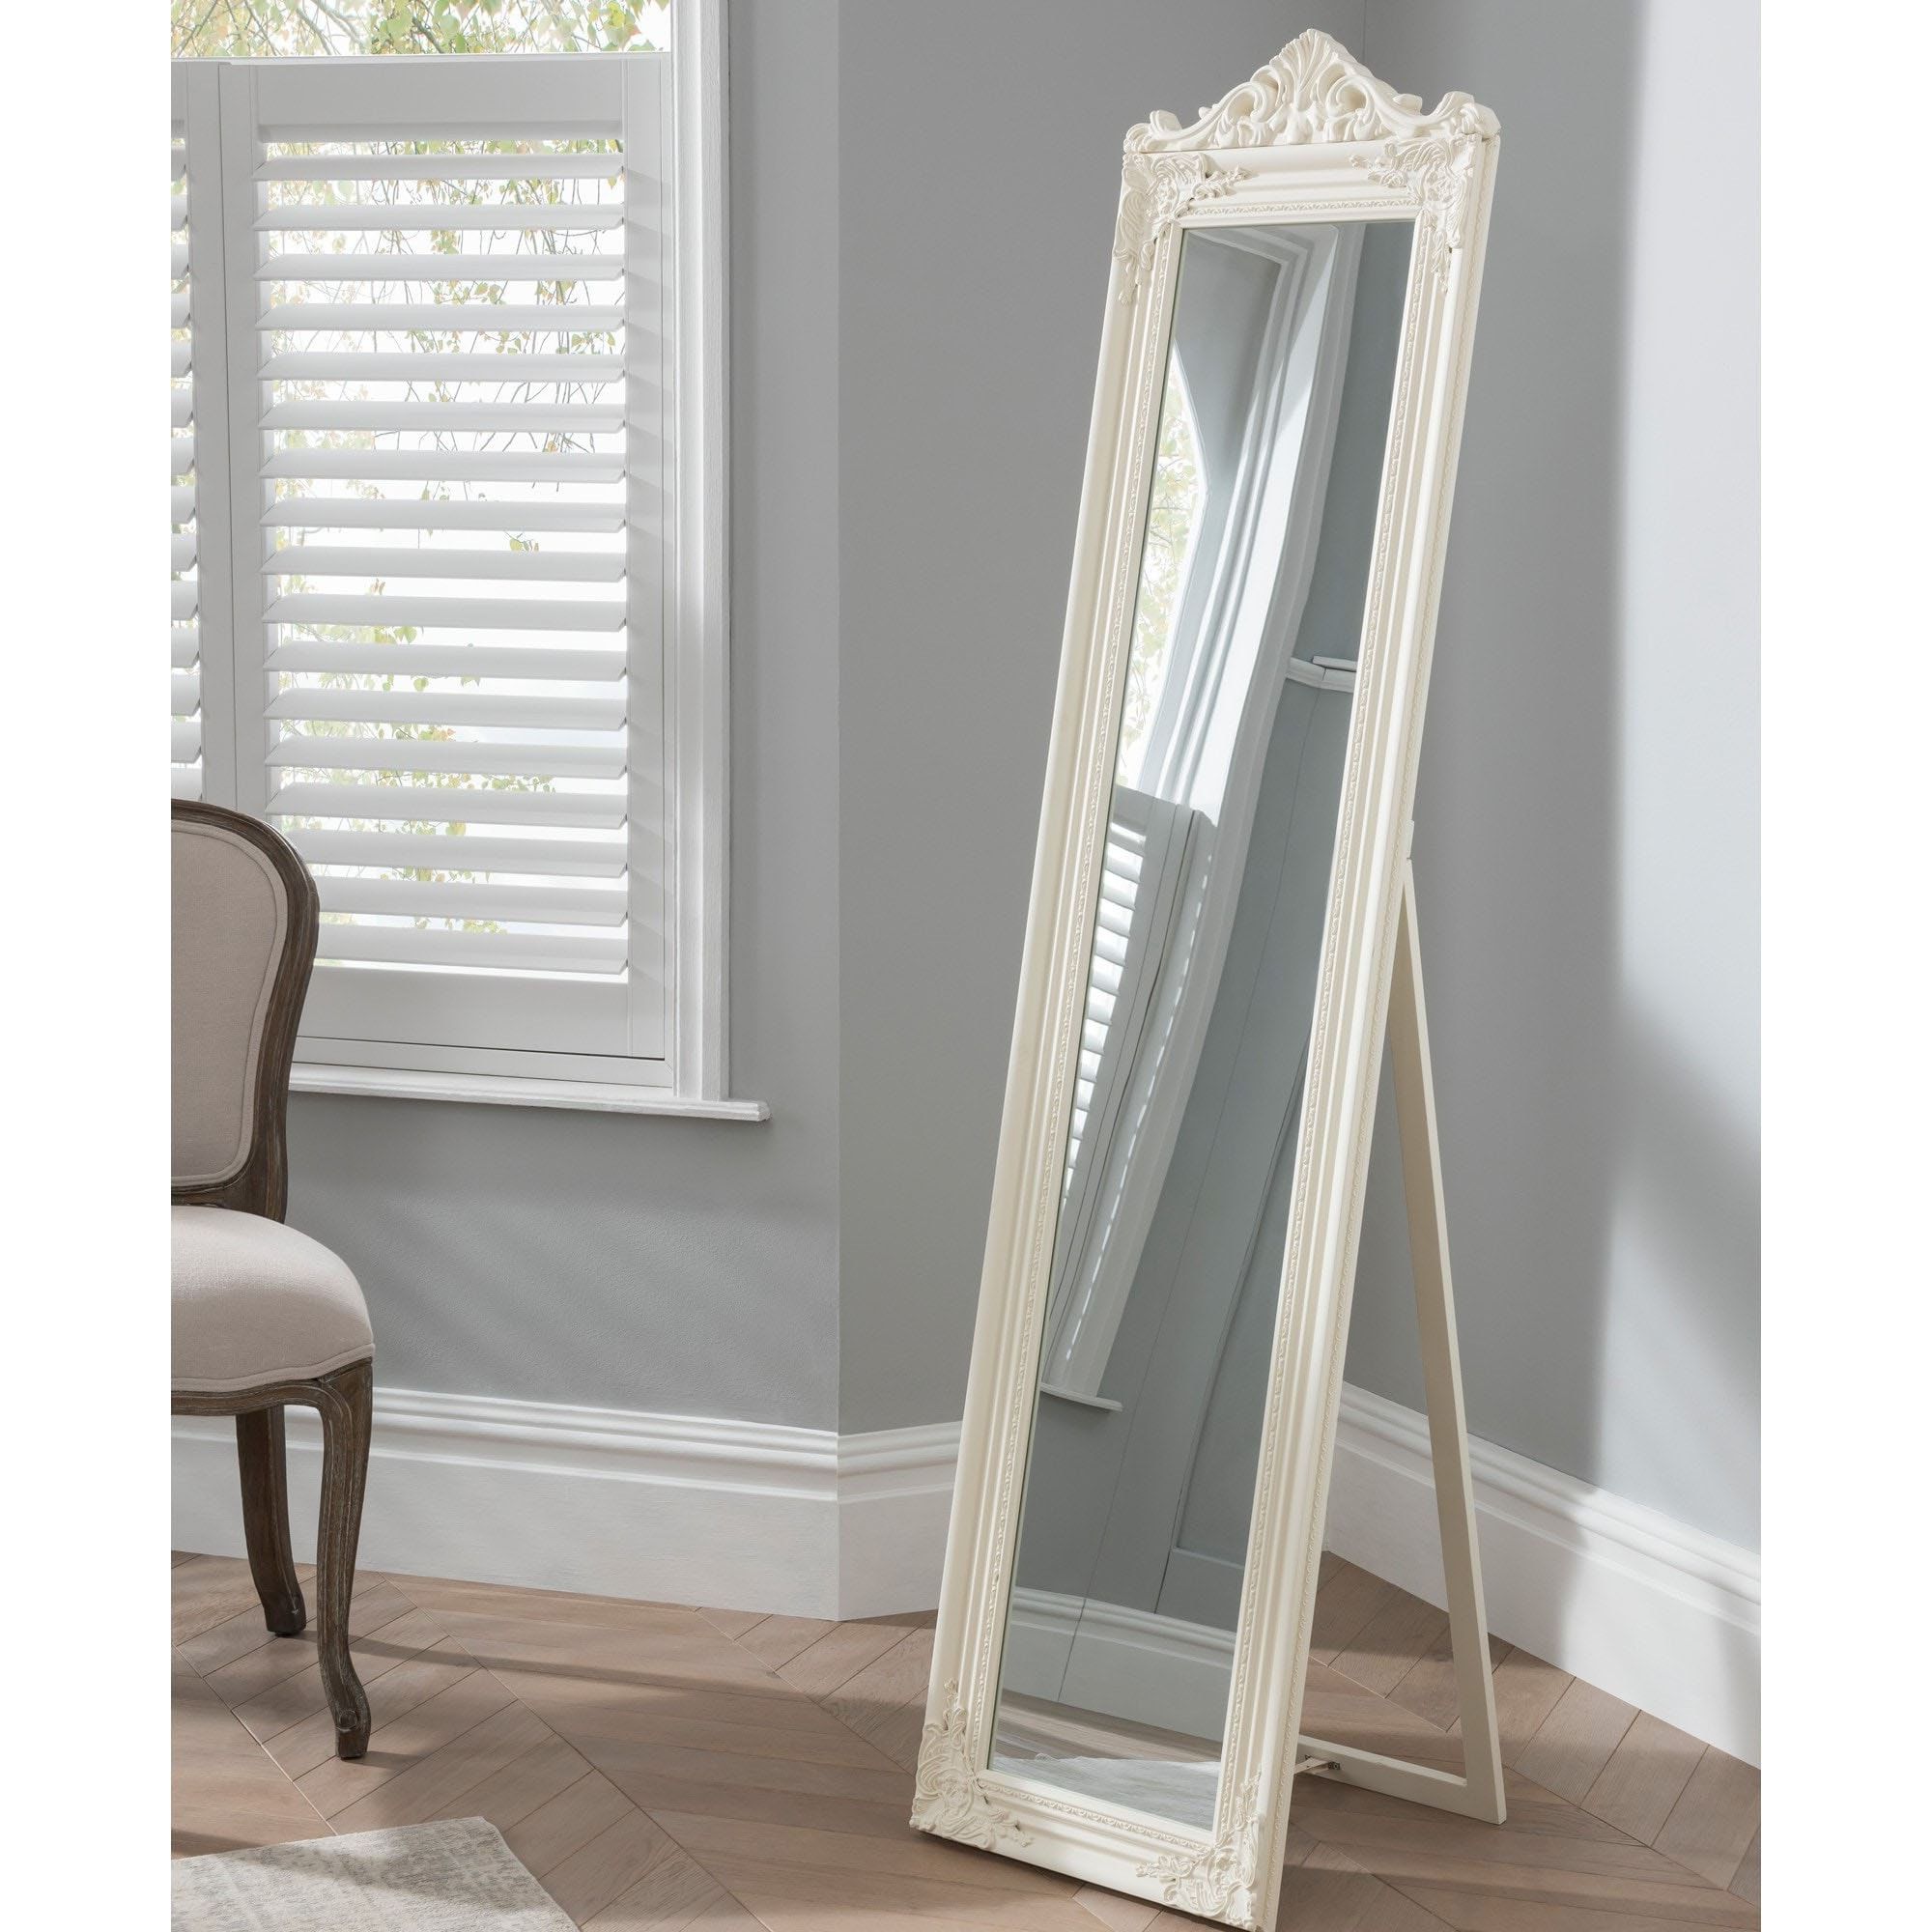 Dark Mahogany Full Length Mirrors For Well Known Full Length Mirror In Cream The Elizabeth Floor Standing Mirror (View 3 of 15)